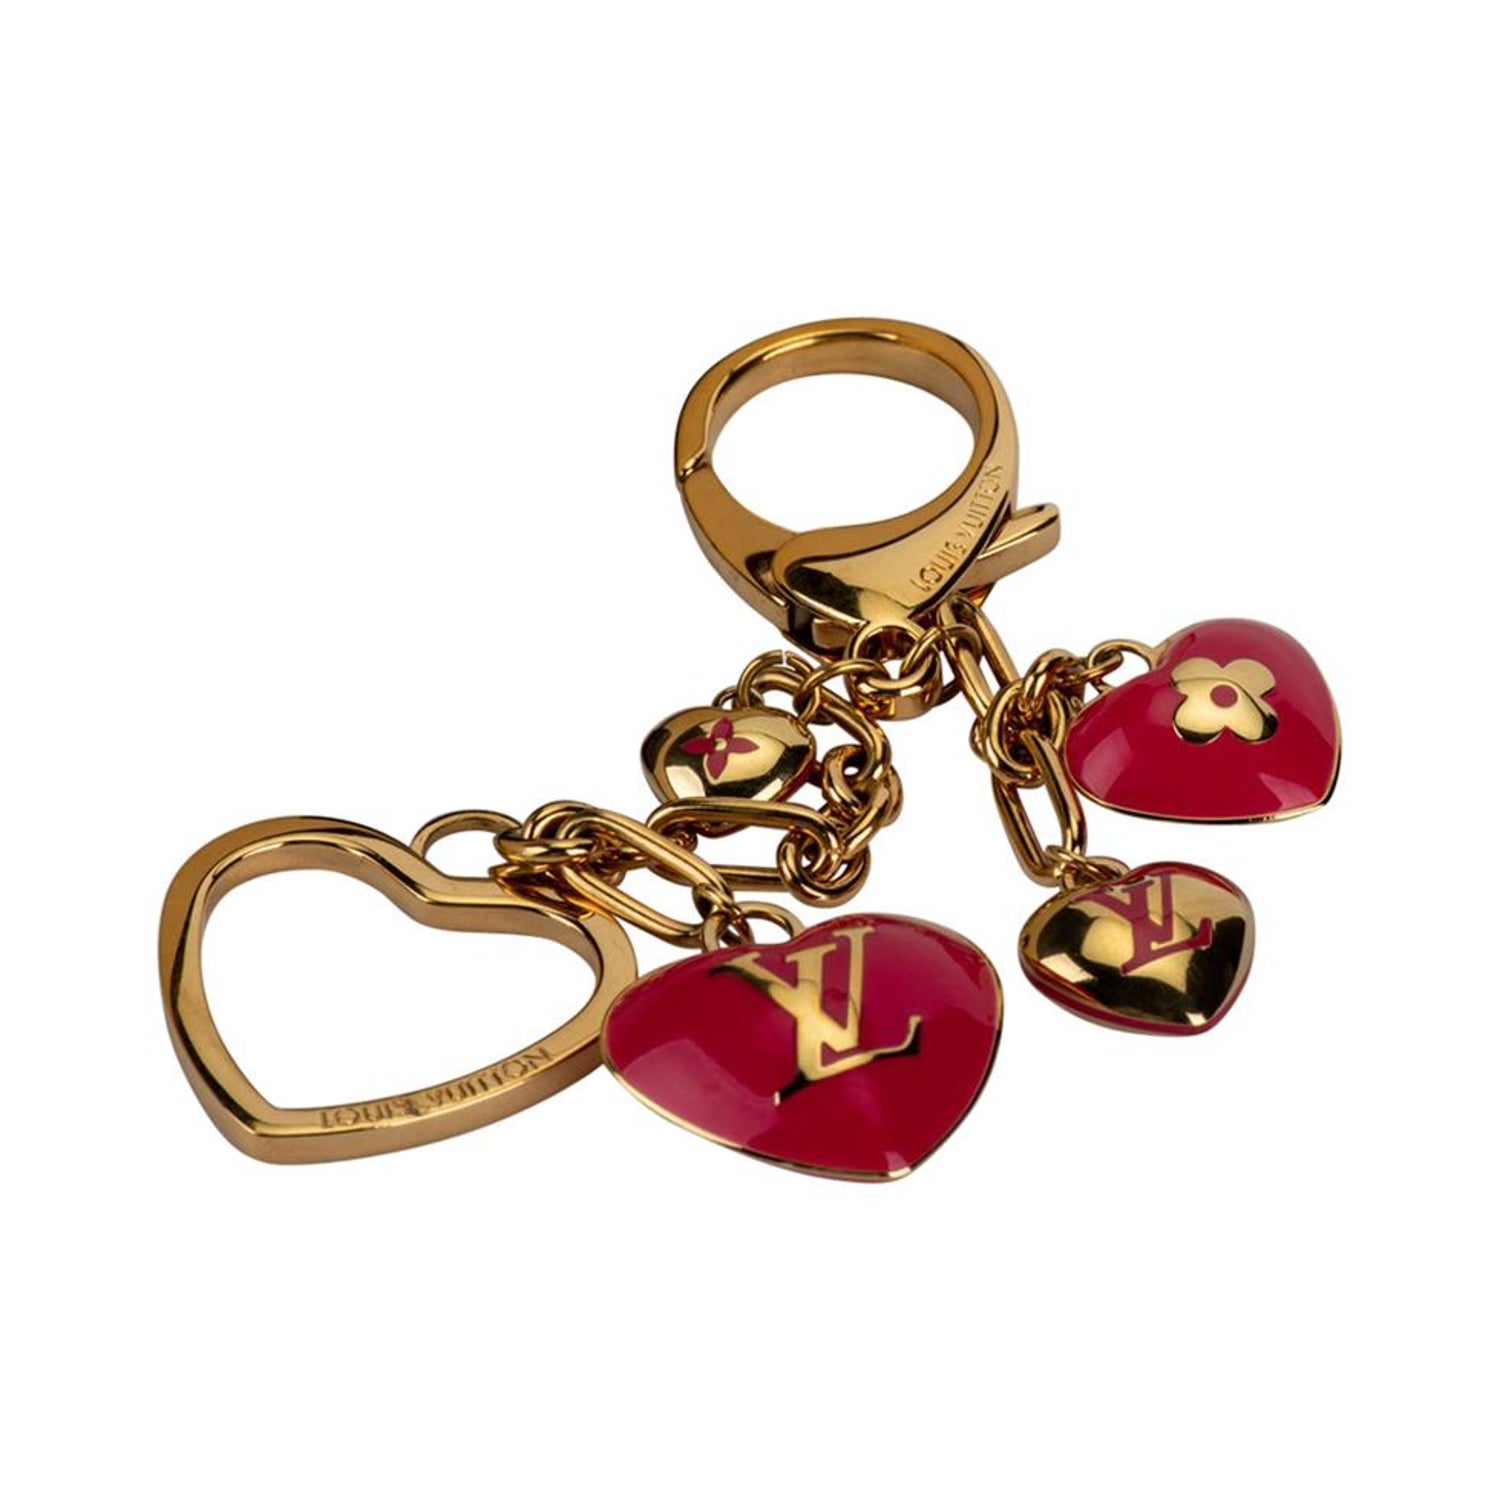 Louis Vuitton Silver-tone Pink Very Bag Charm and Key Holder at